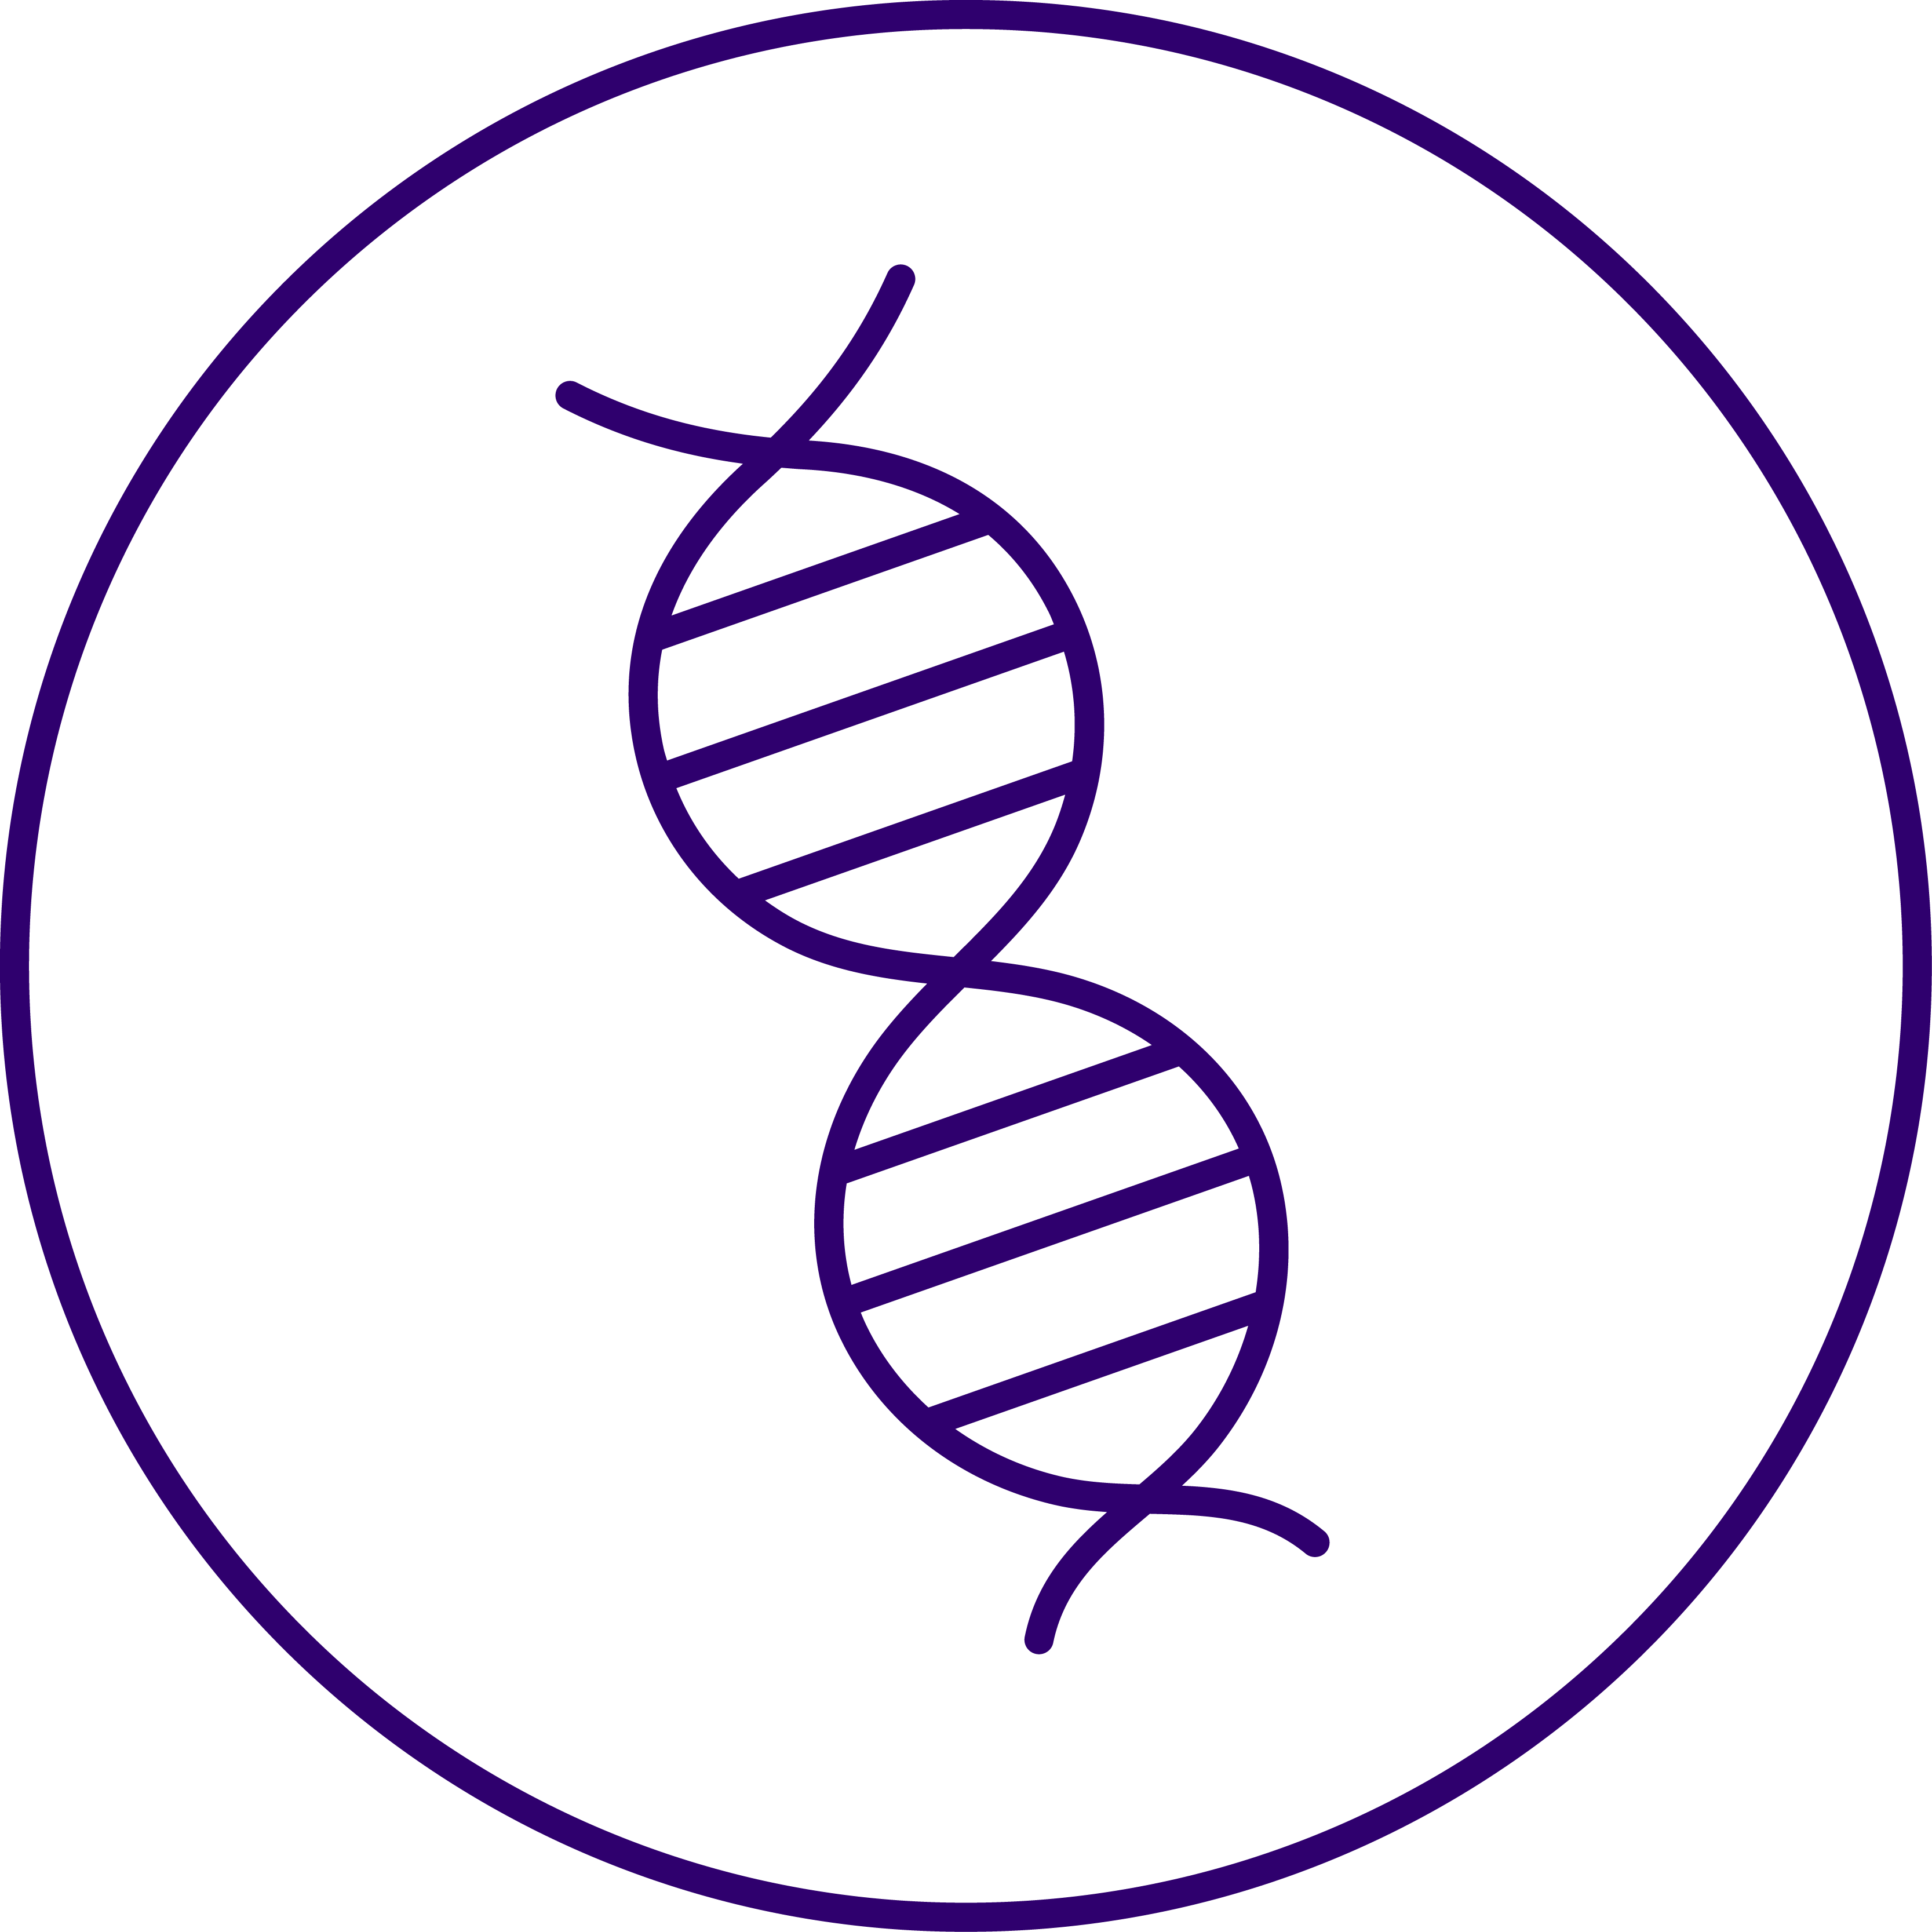 icon containing dna inside a purple circle